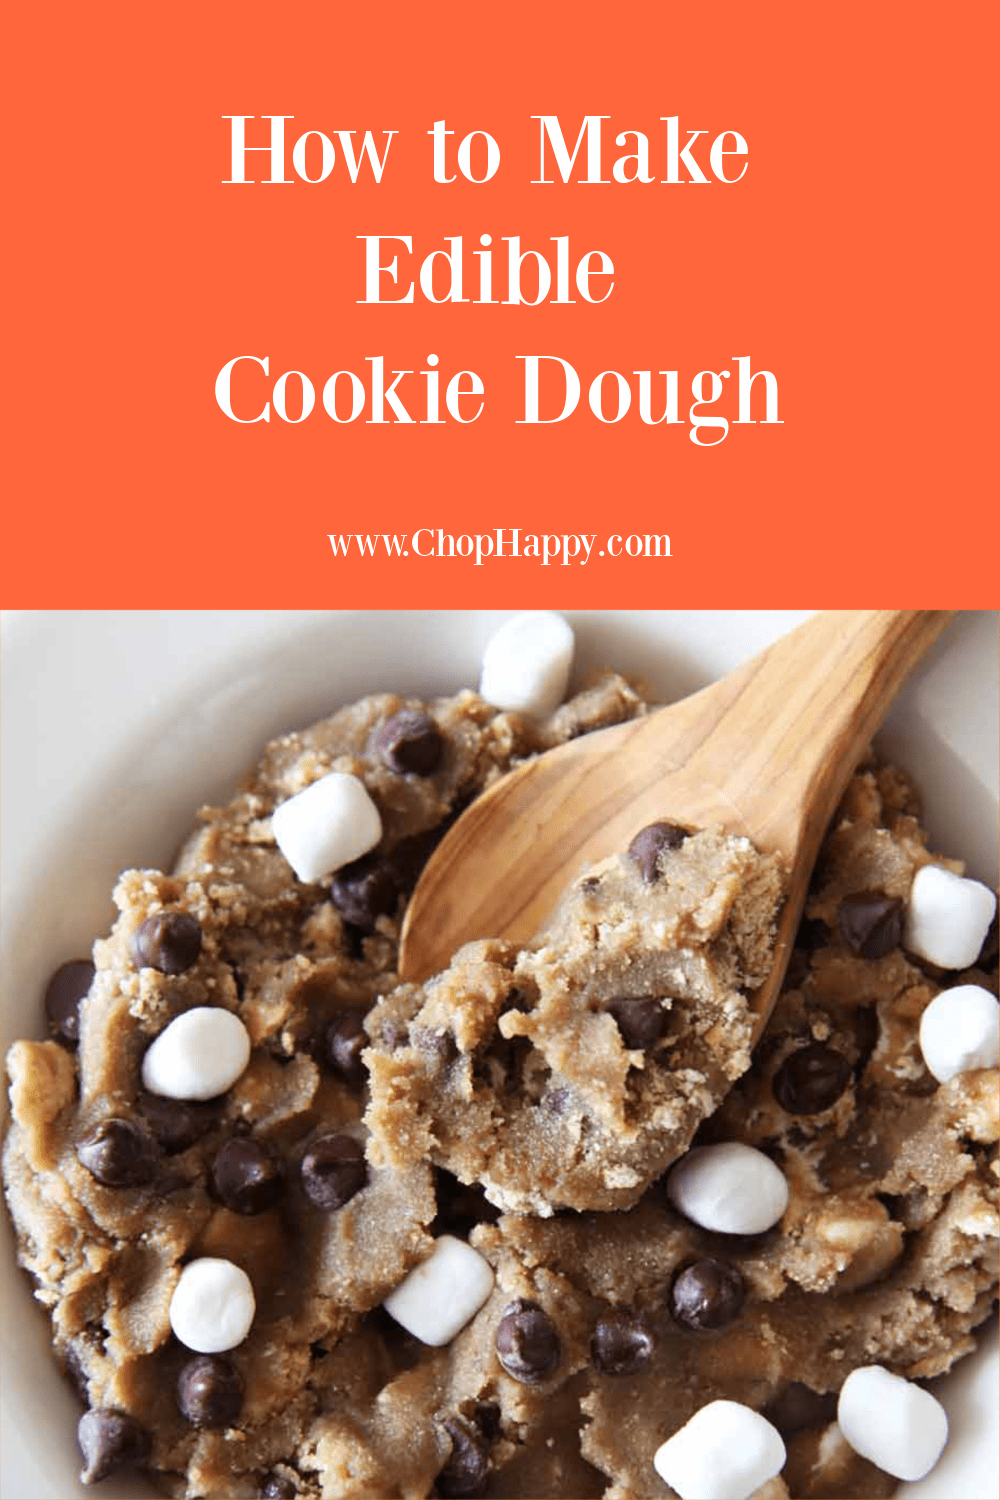 How to Make Edible Cookie Dough. Almond flour, chocolate chips, butter, brown sugar, and marshmallows. This is an easy cookie dough recipe for non bakers. www.ChopHappy.com #cookiedough #cookierecipe